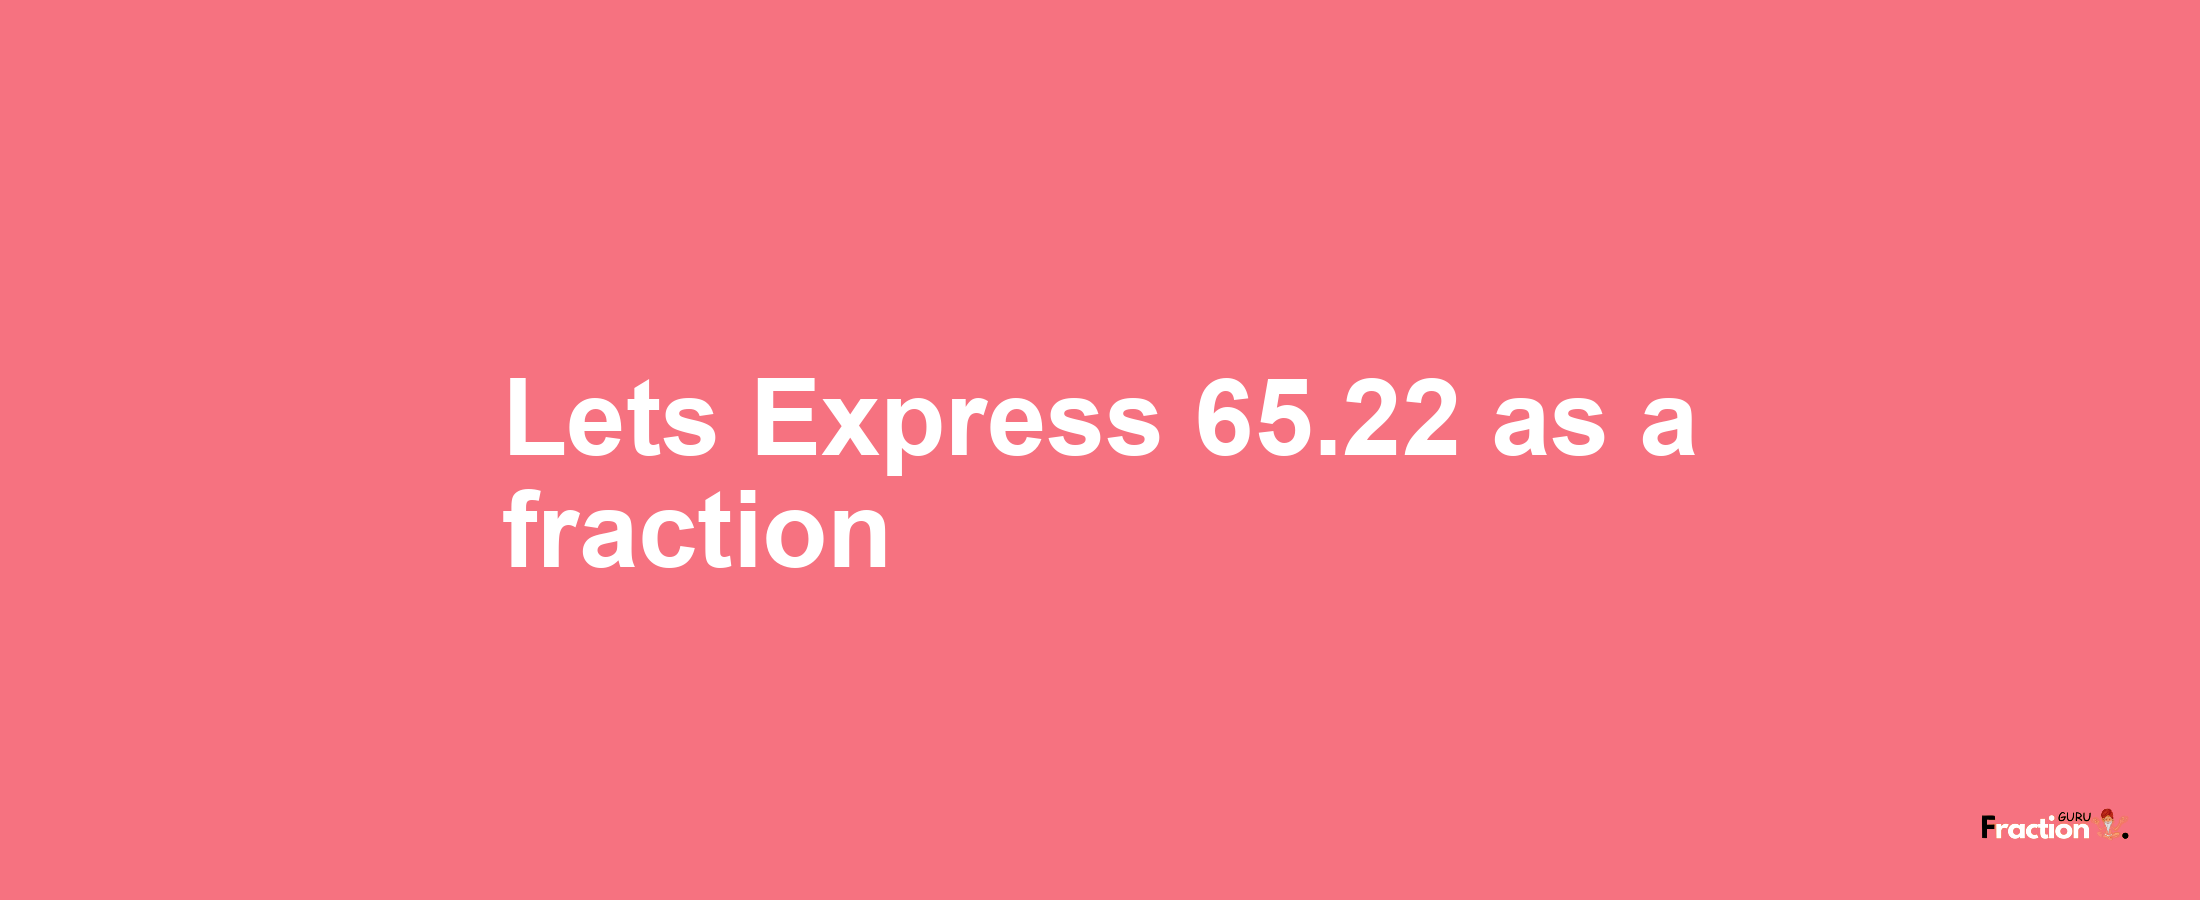 Lets Express 65.22 as afraction